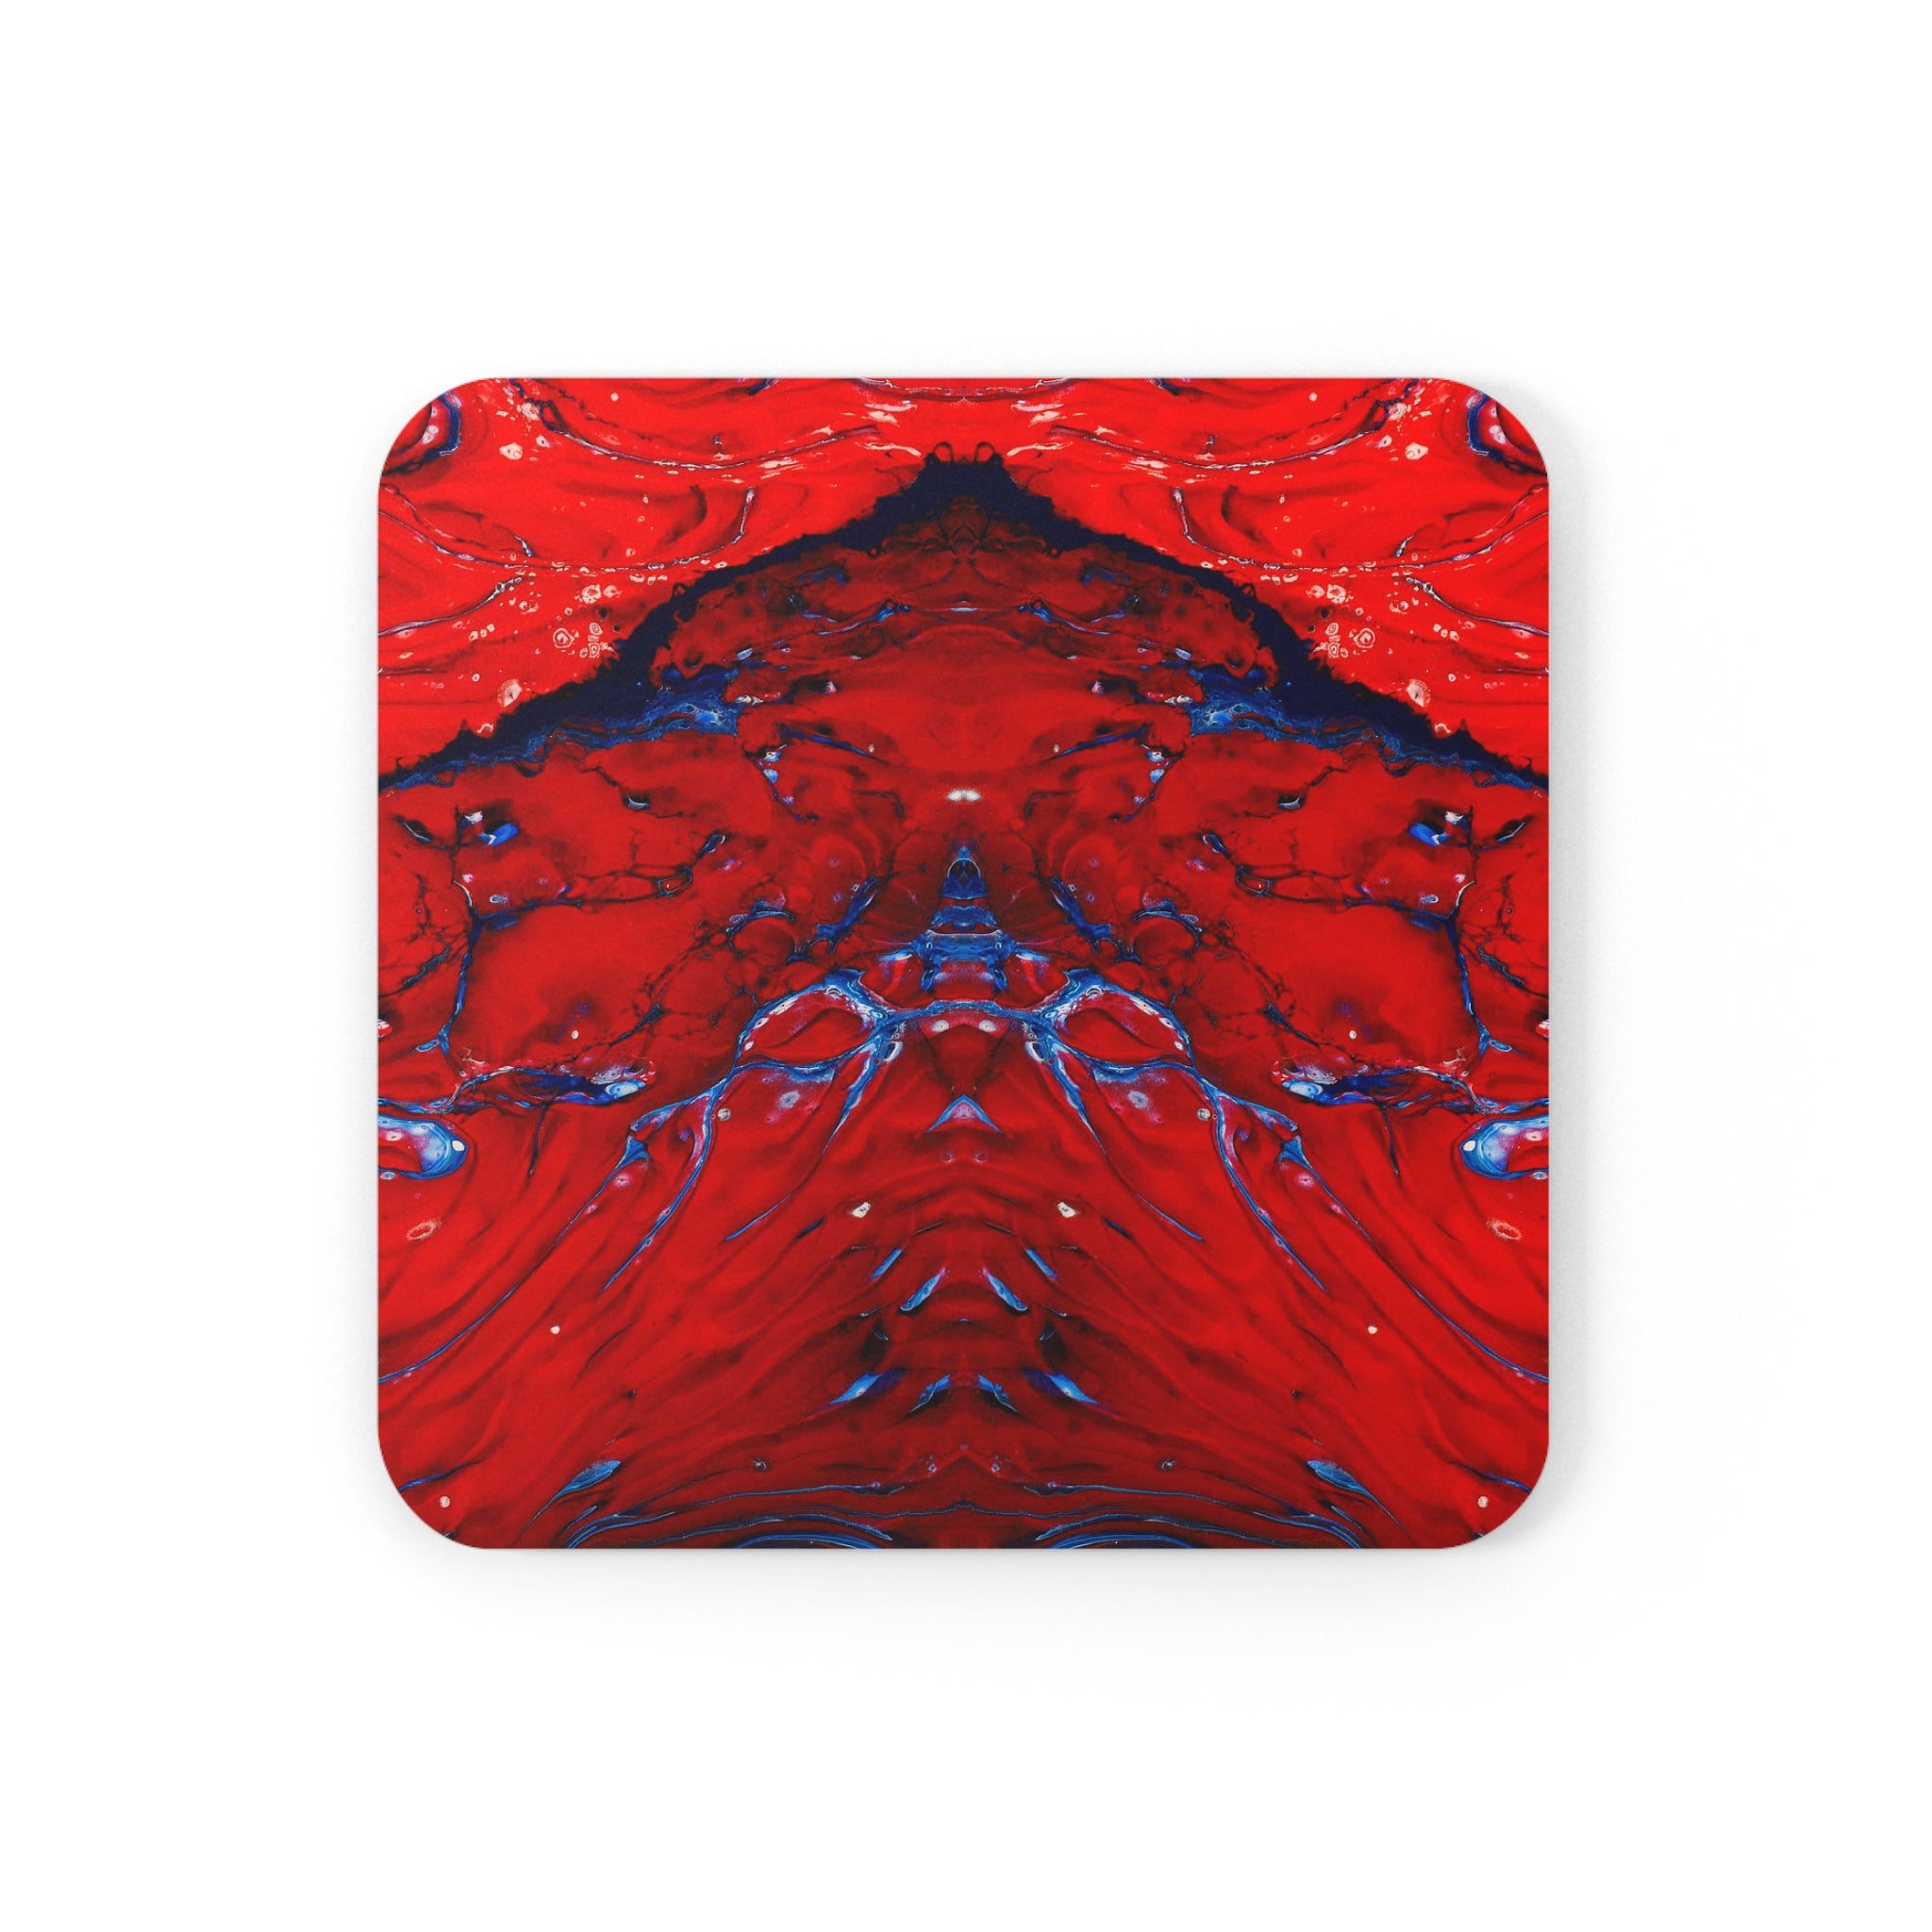 Cameron Creations - Devil Inside - Stylish Coffee Coaster - Square Front